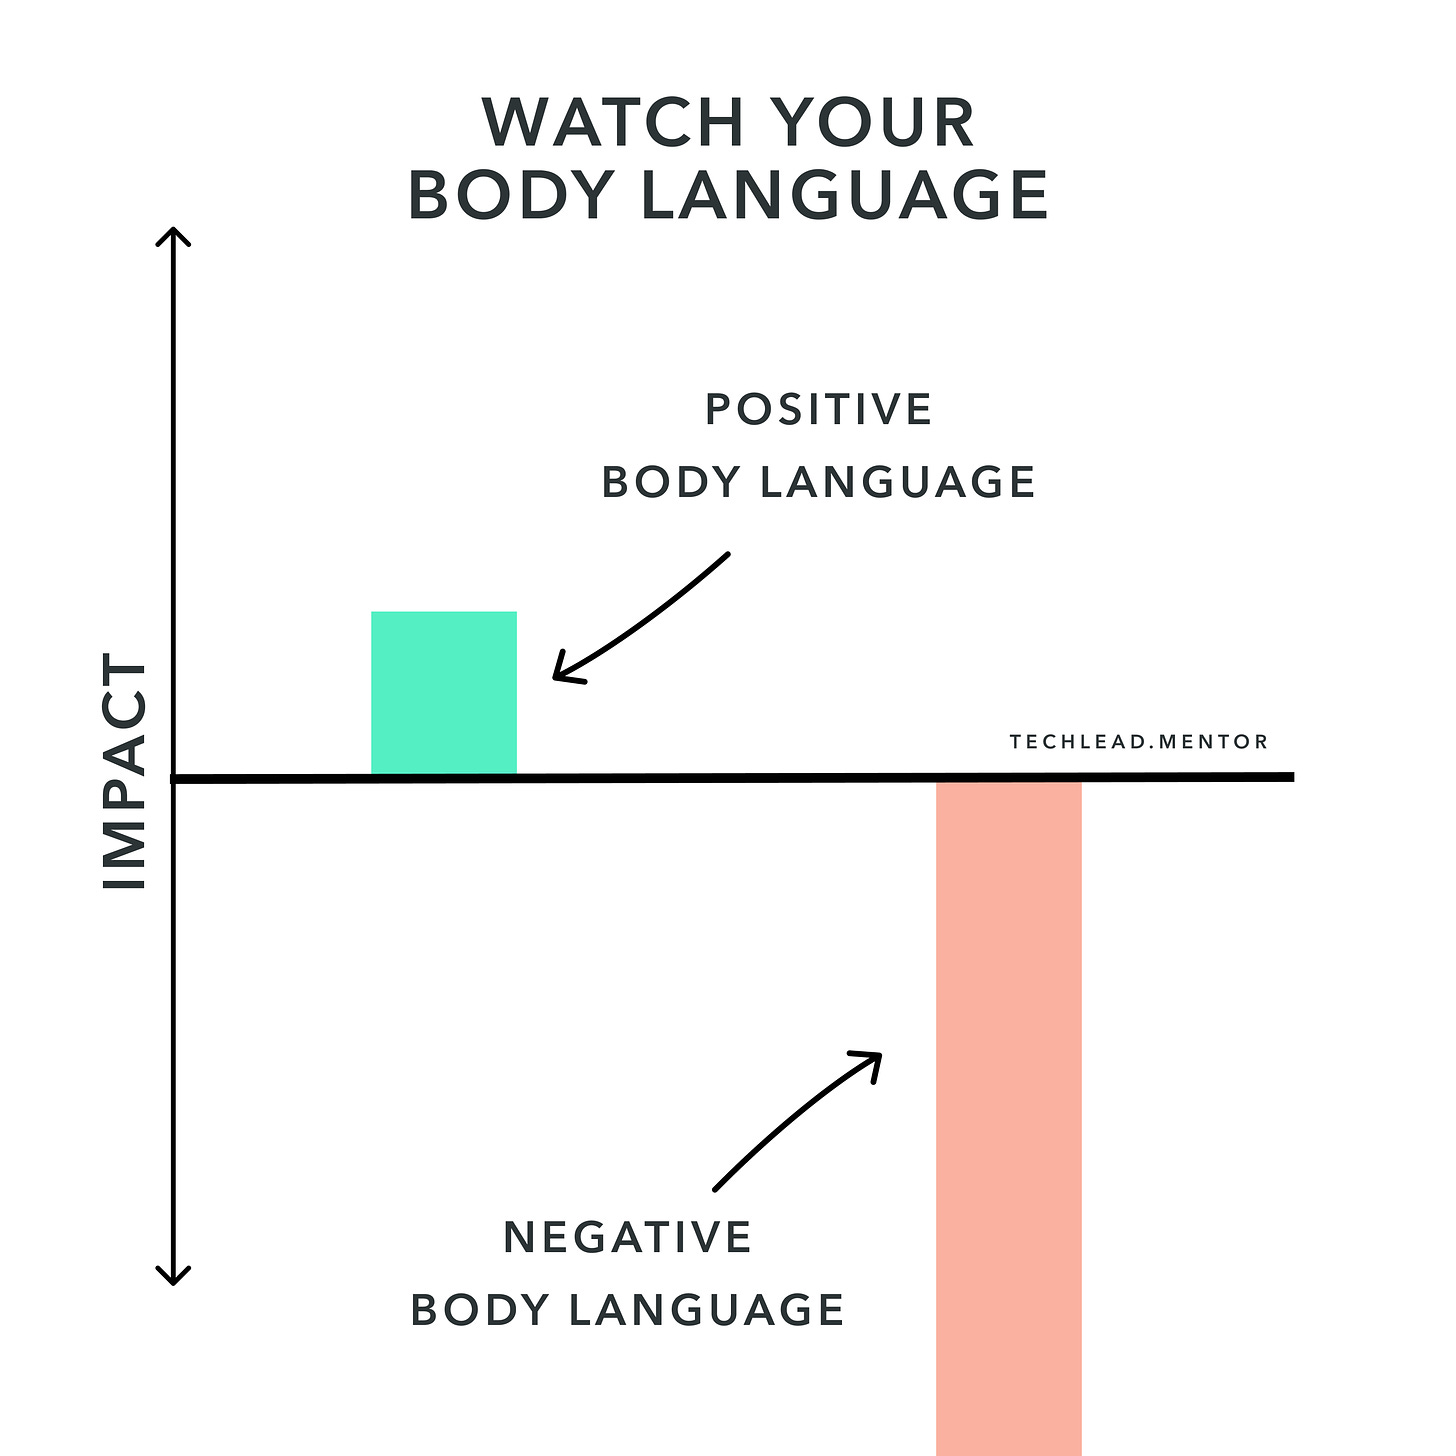 Negative body language can have severe consequence.